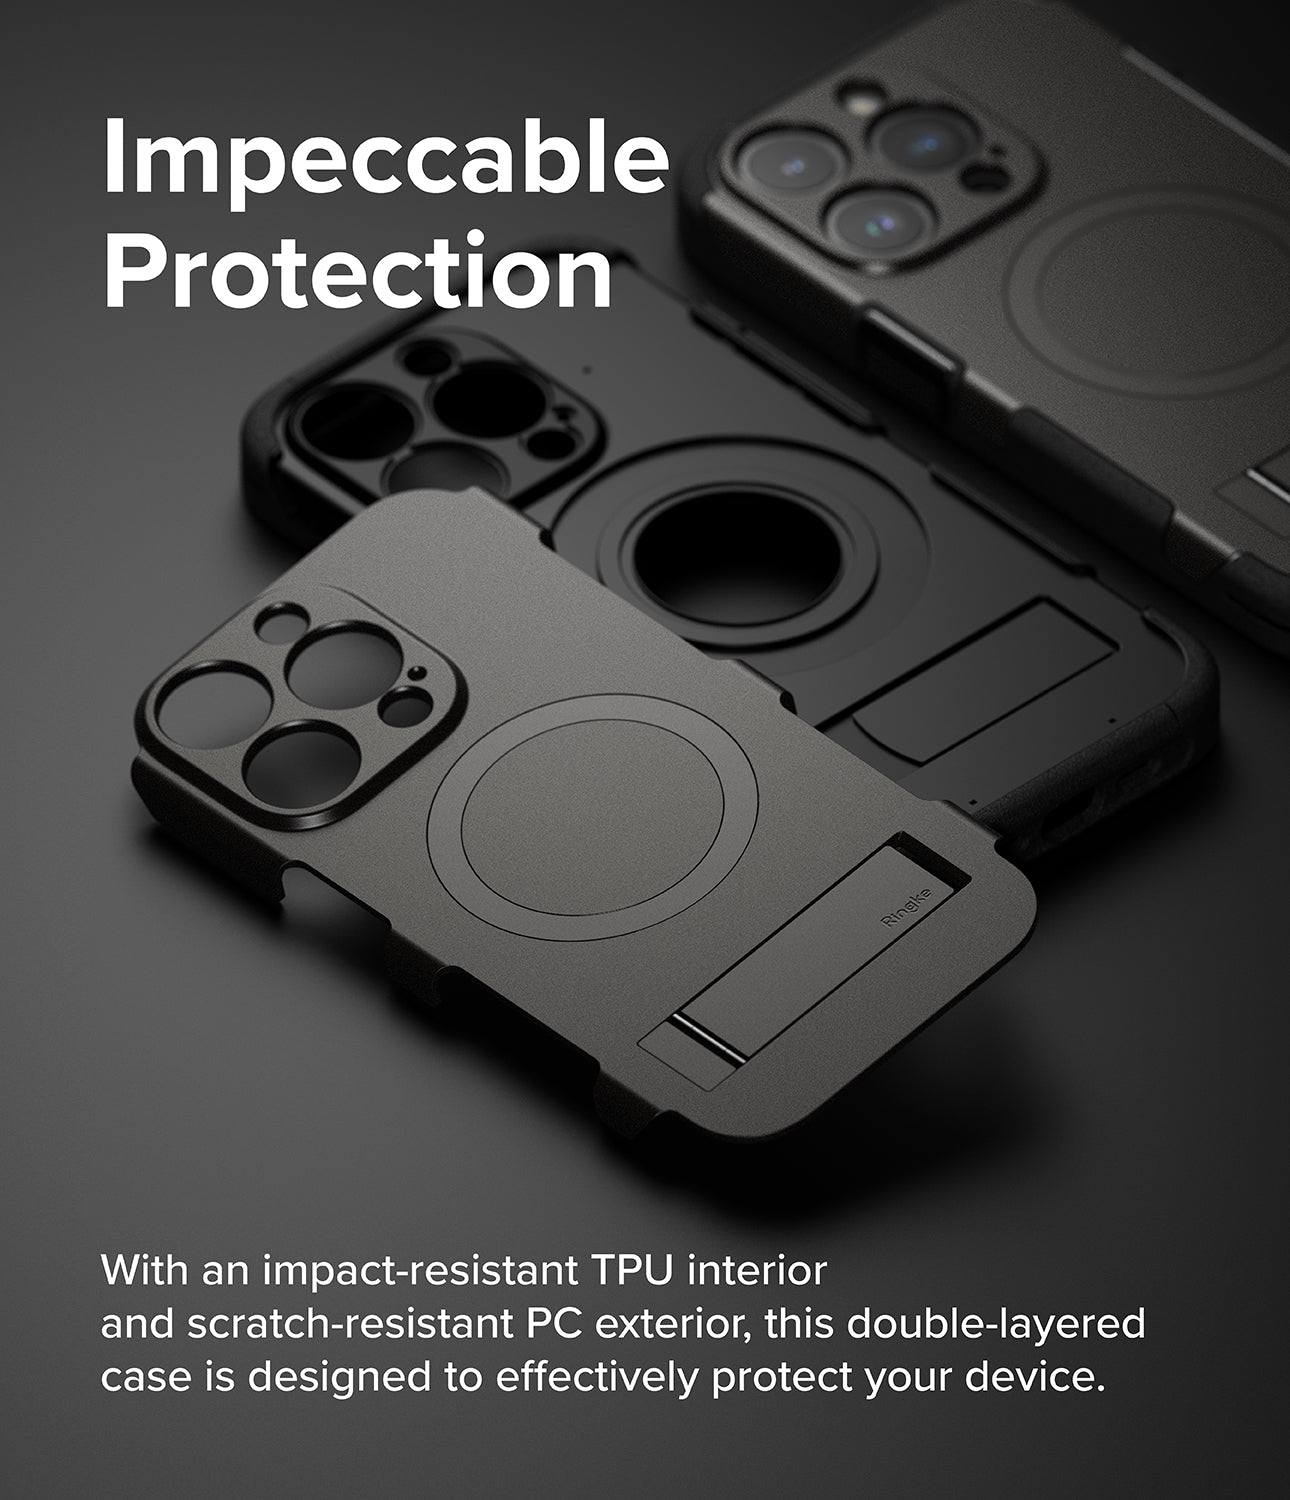 iPhone 15 Pro Max Case | Alles - Gun Metal - Impeccable Protection. With an impact-resistant TPU interior and scratch-resistant PC exterior, this double-layered case is designed to effectively protect your deivce.